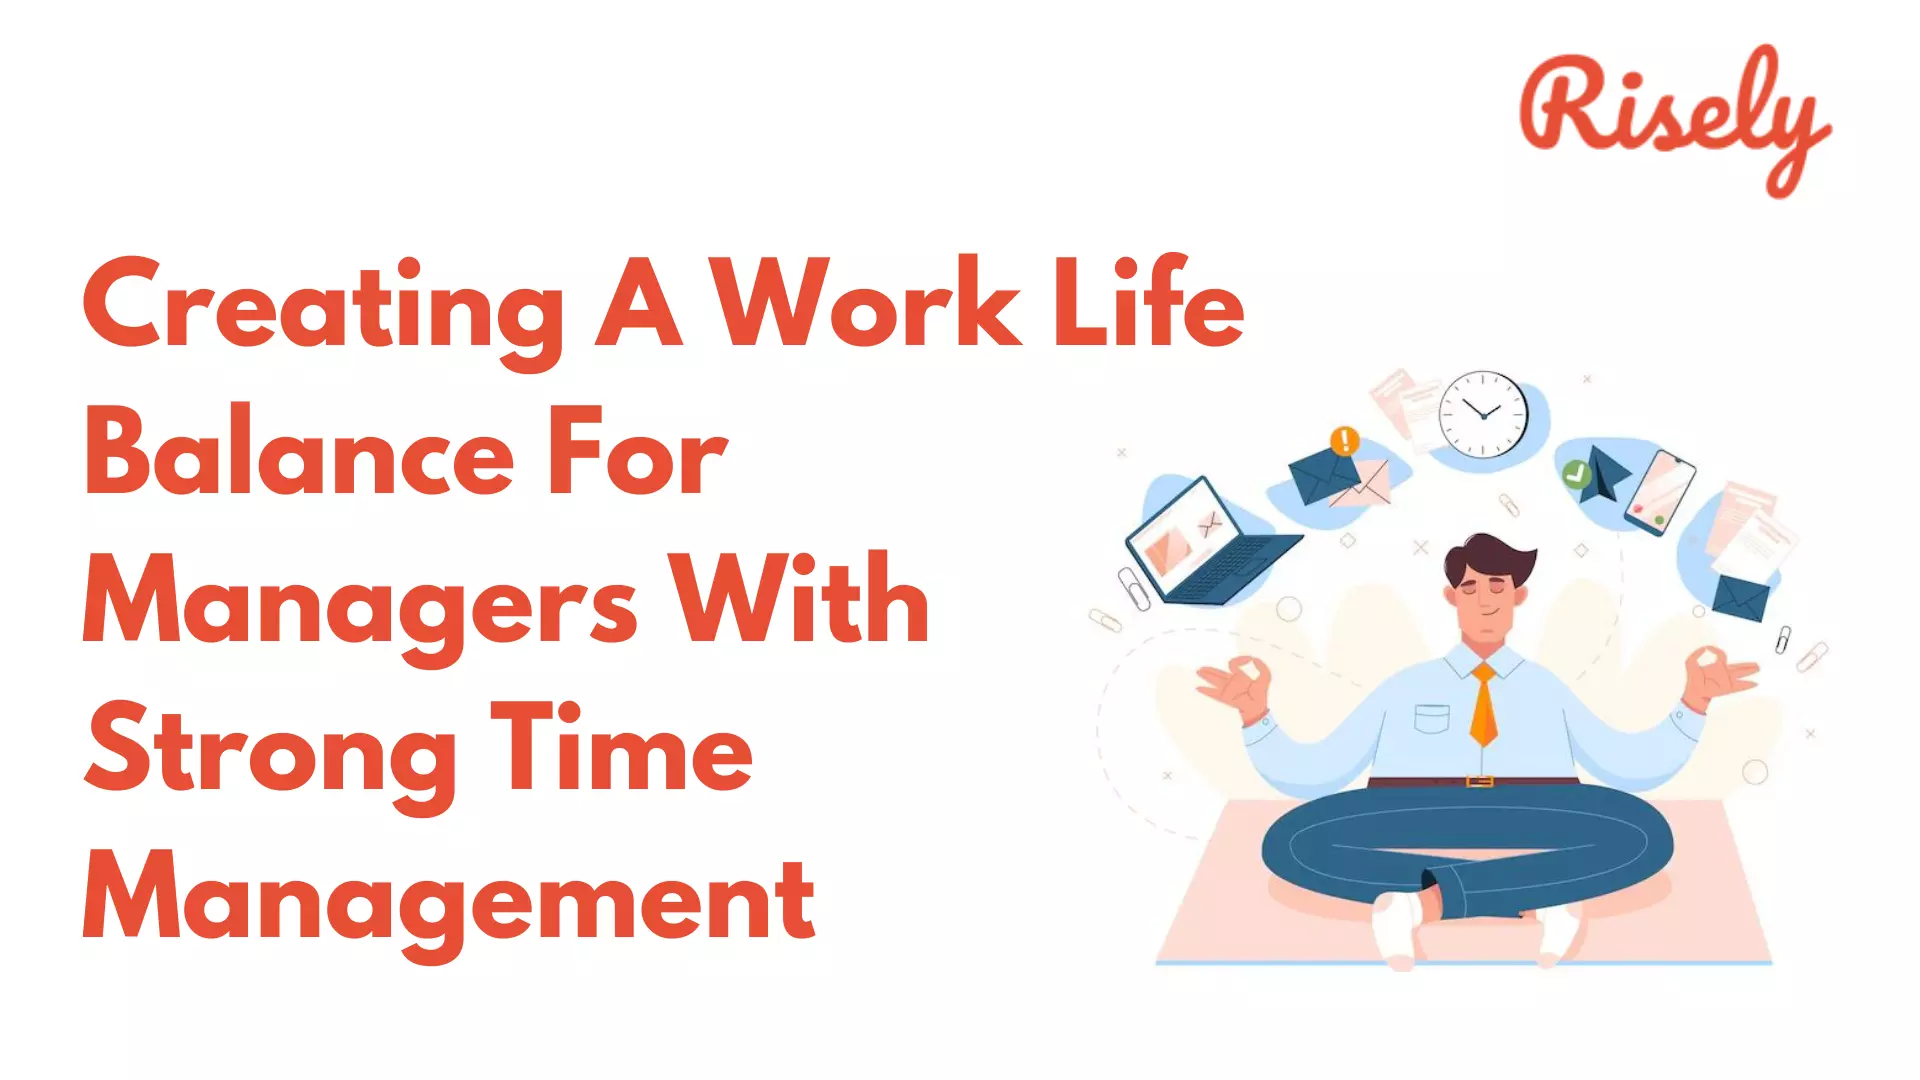 5 Effective Time Management Tips to Achieve Work-Life Balance